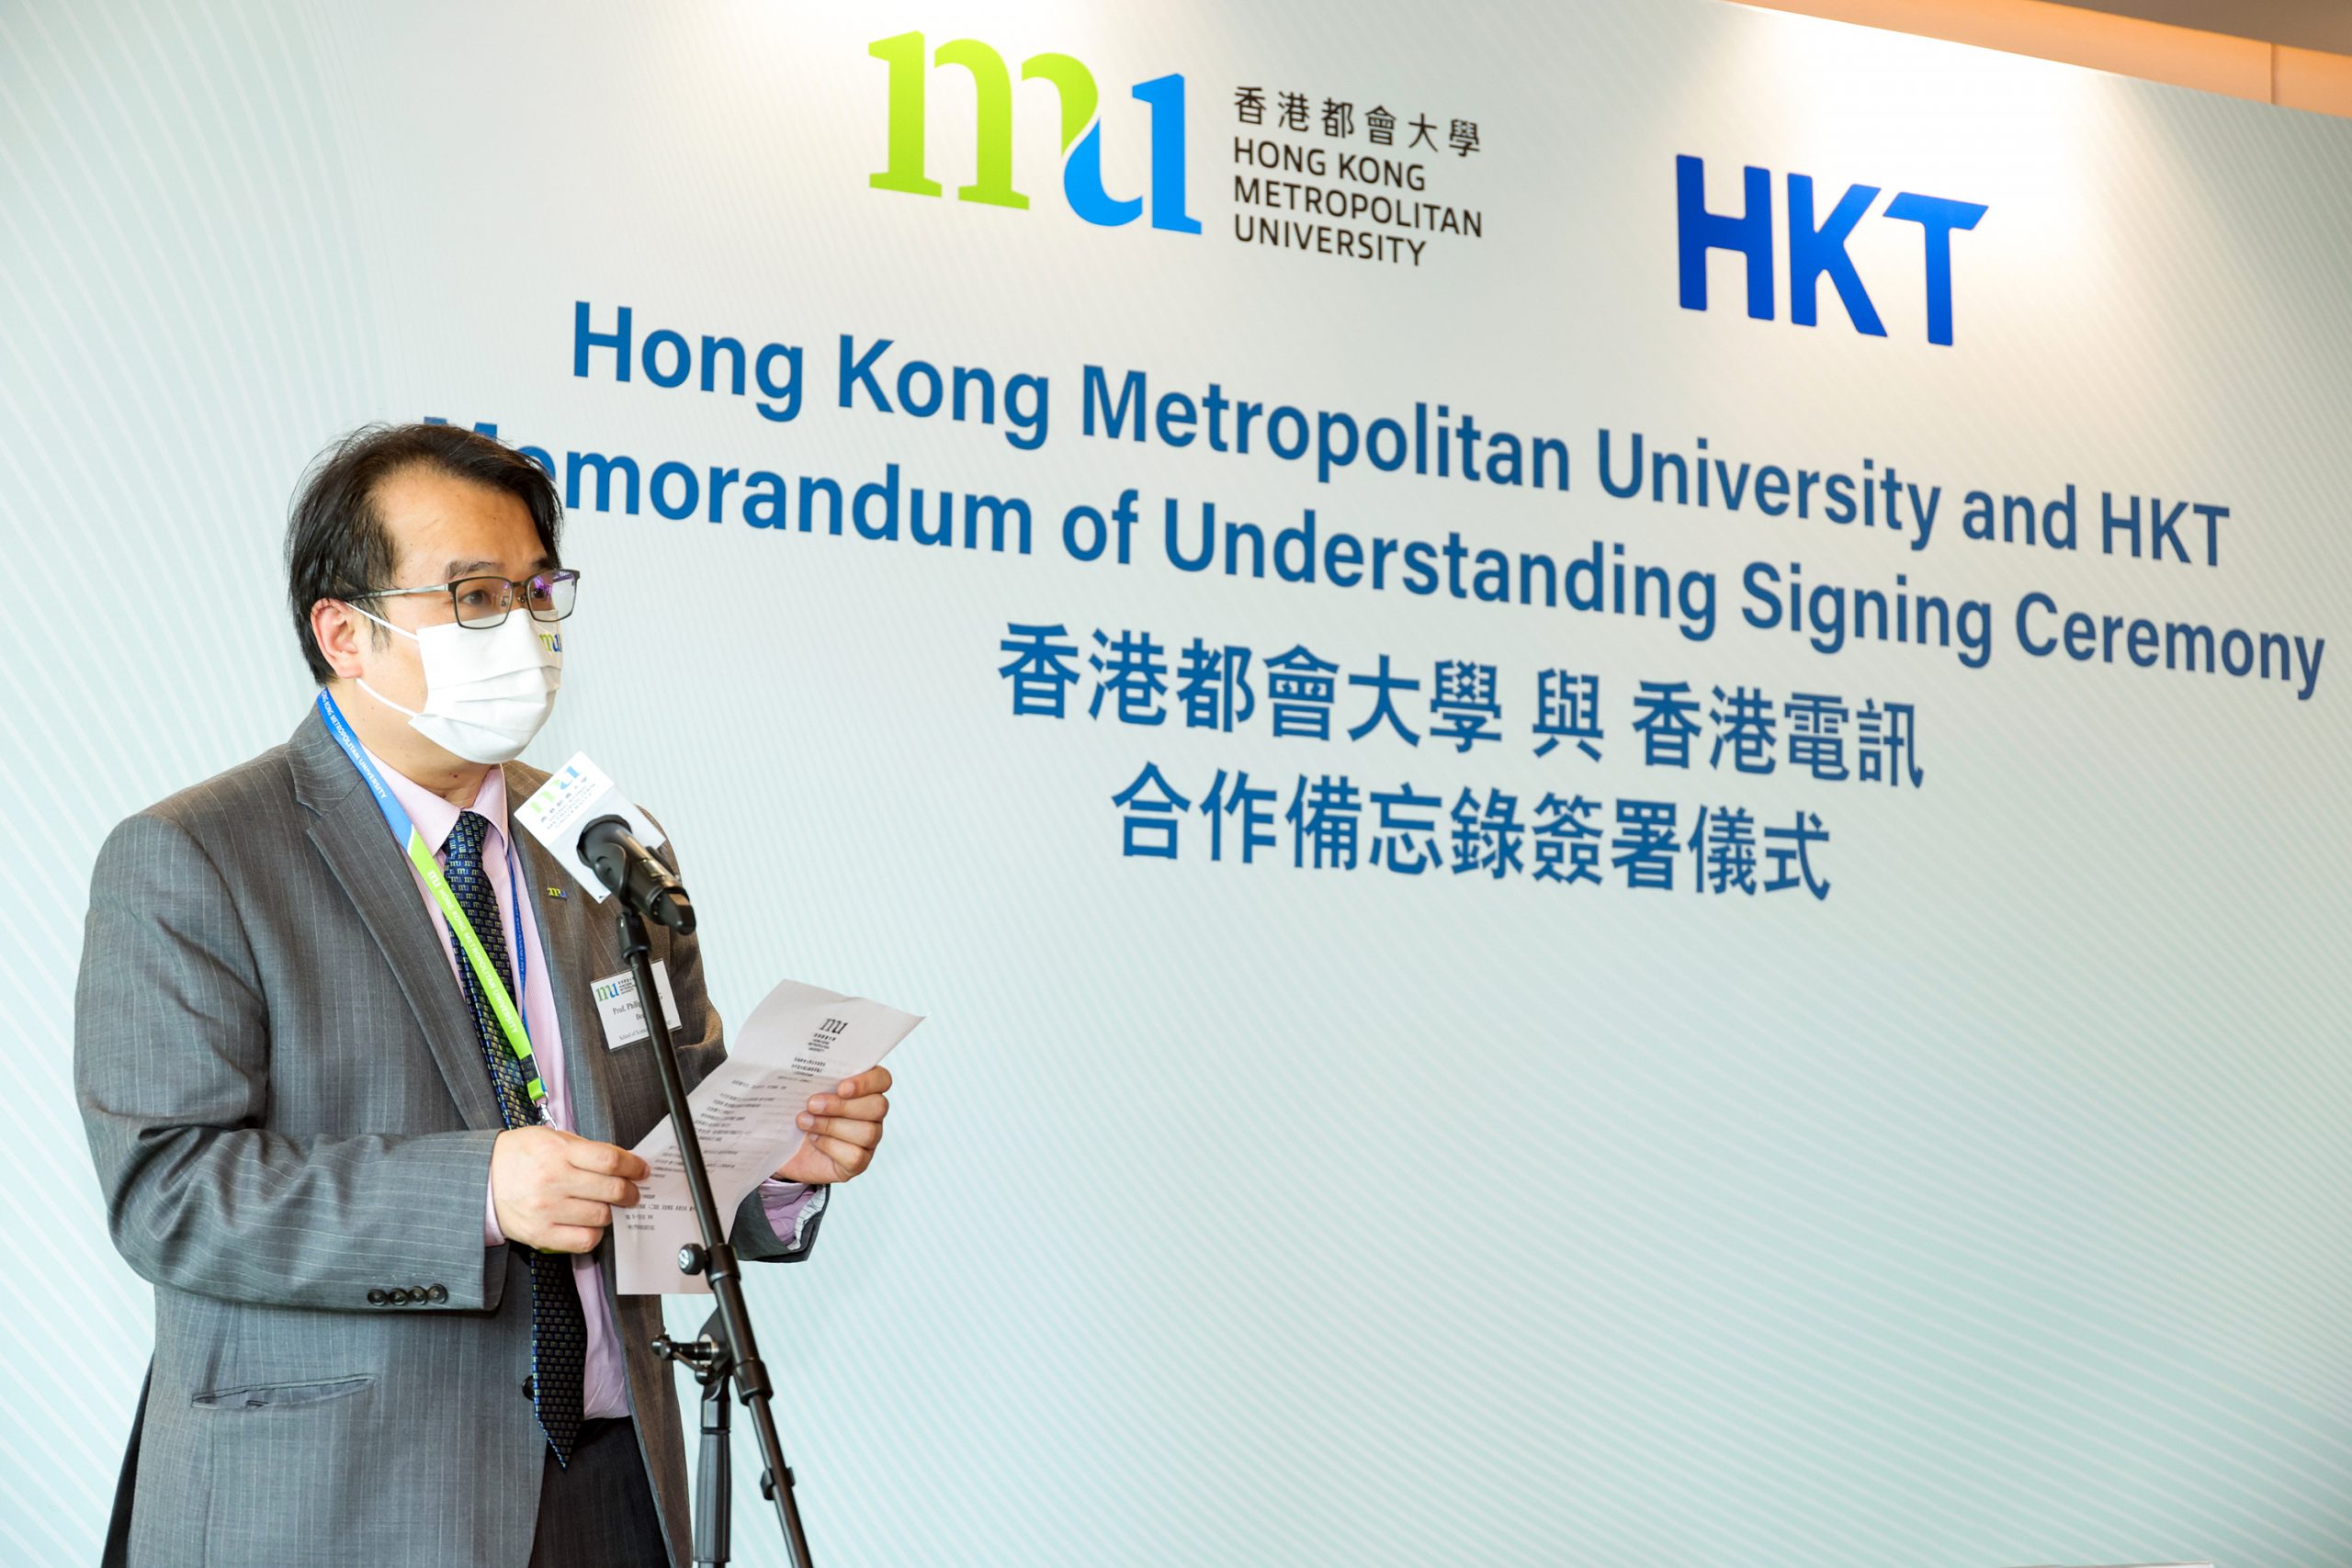 At the signing ceremony, Prof. Philips Wang Fu-lee, Dean of HKMU School of Science & Technology says that HKMU is committed to contributing to the development of engineering, communication technology and information technology in Hong Kong. The collaboration with HKT will strengthen the exchange between HKMU and HKT in various areas and contribute towards building a smart city.